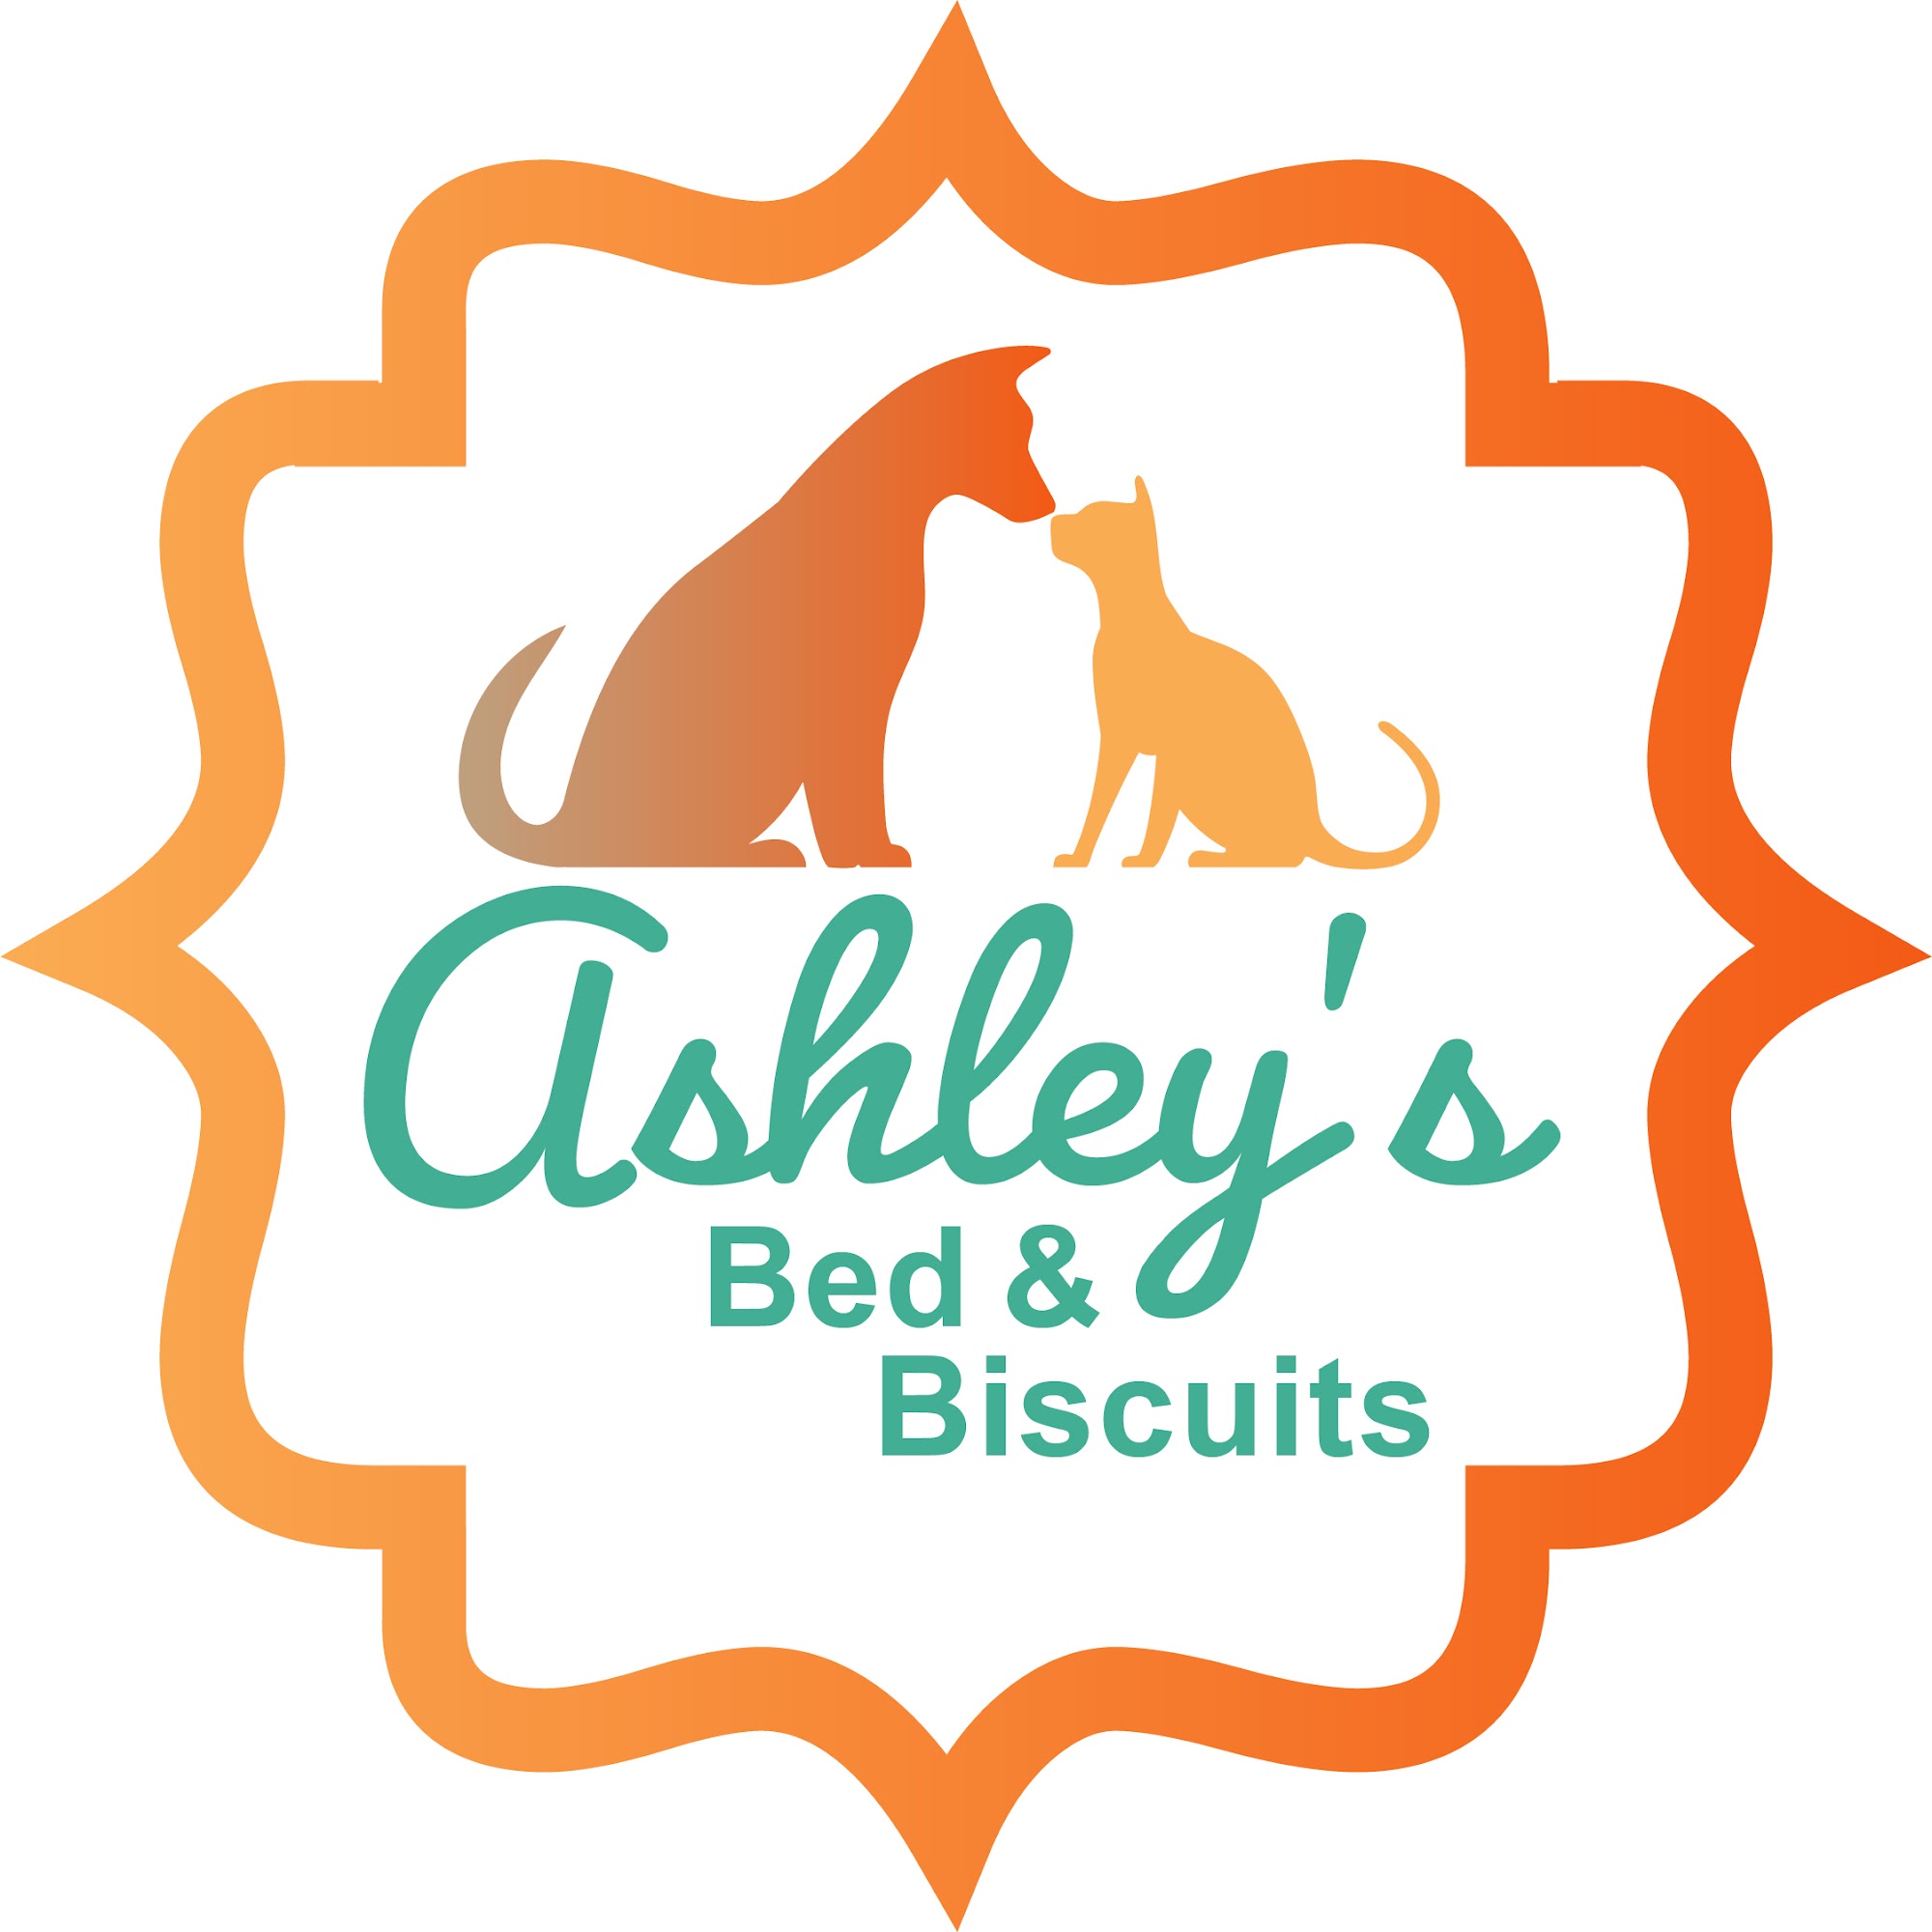 Ashley's Bed & Biscuits 215 N Taylor Ave, Crystal City Missouri 63019